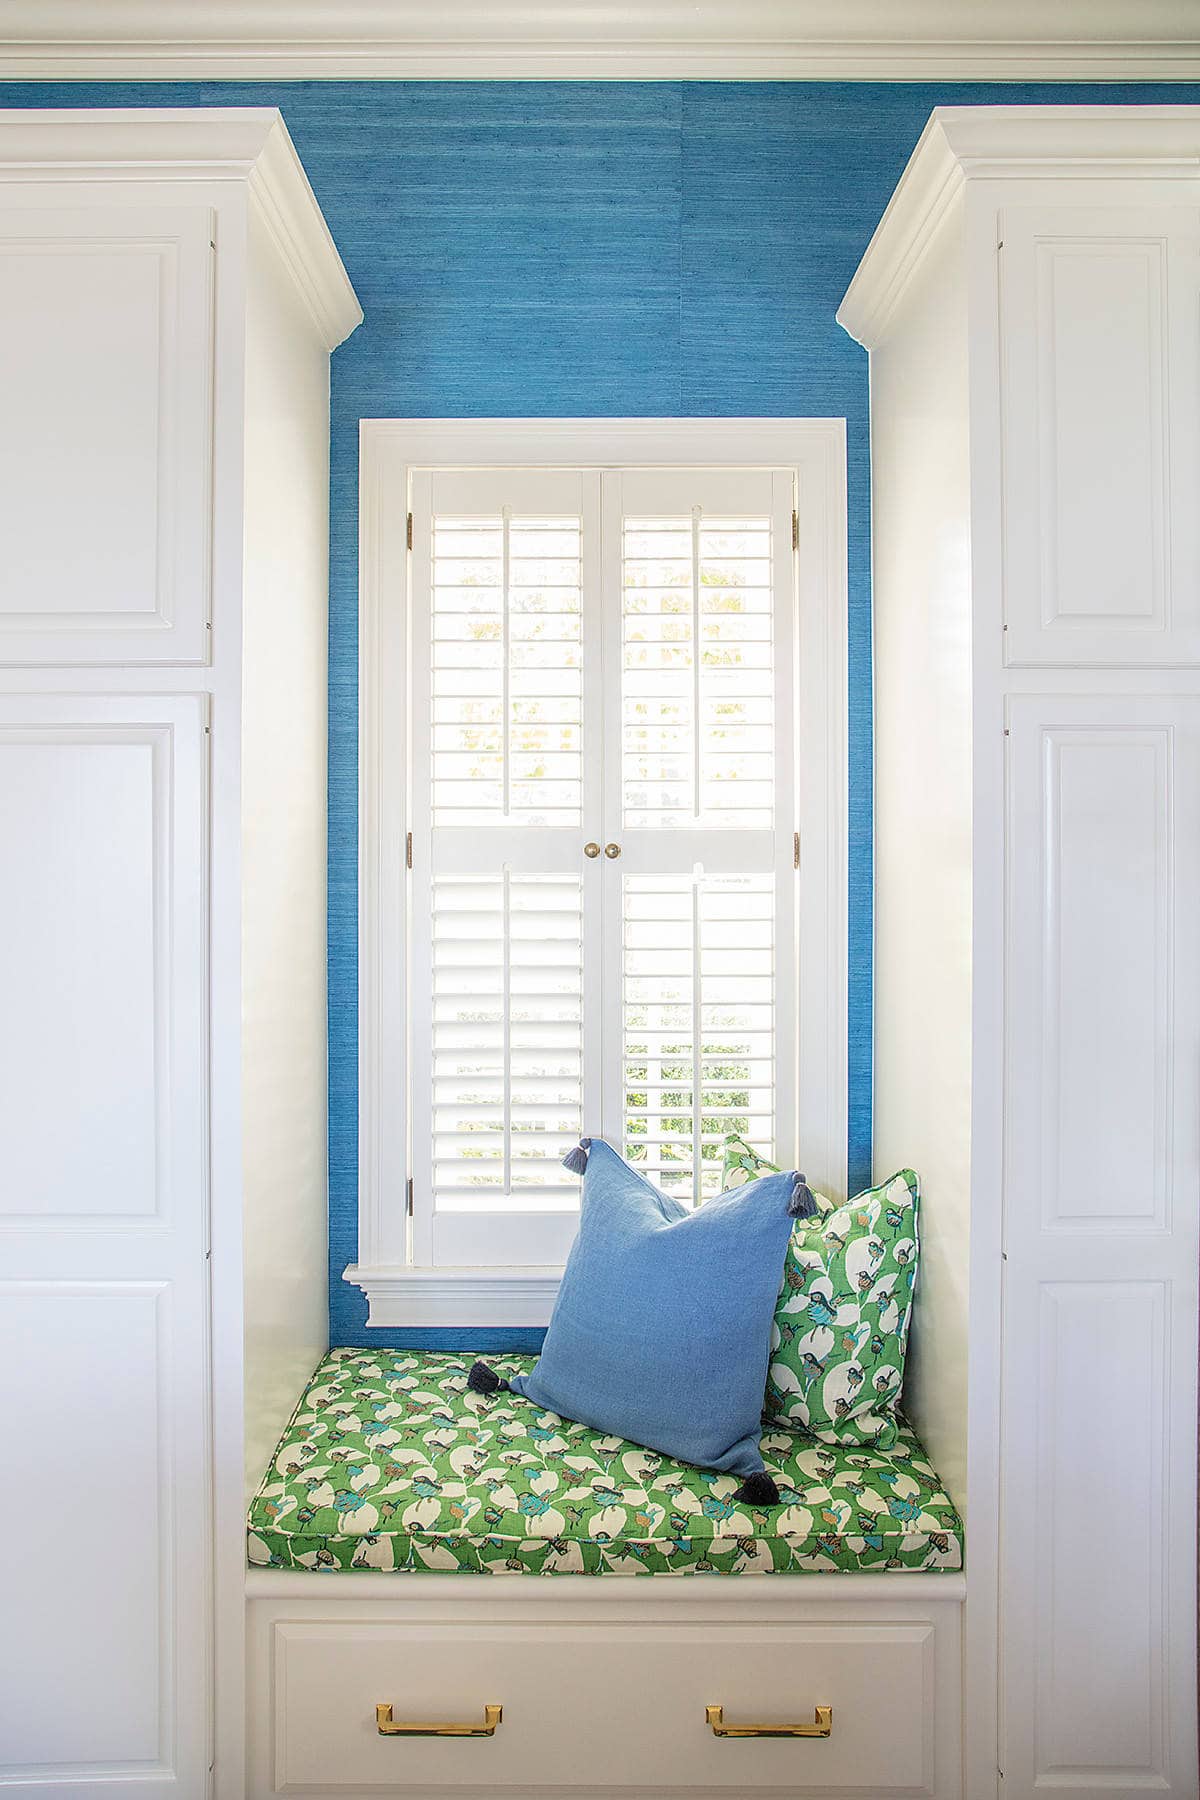 Home Tour: Window nook featuring a white window, blue wall and built-in seat with green patterned pillow